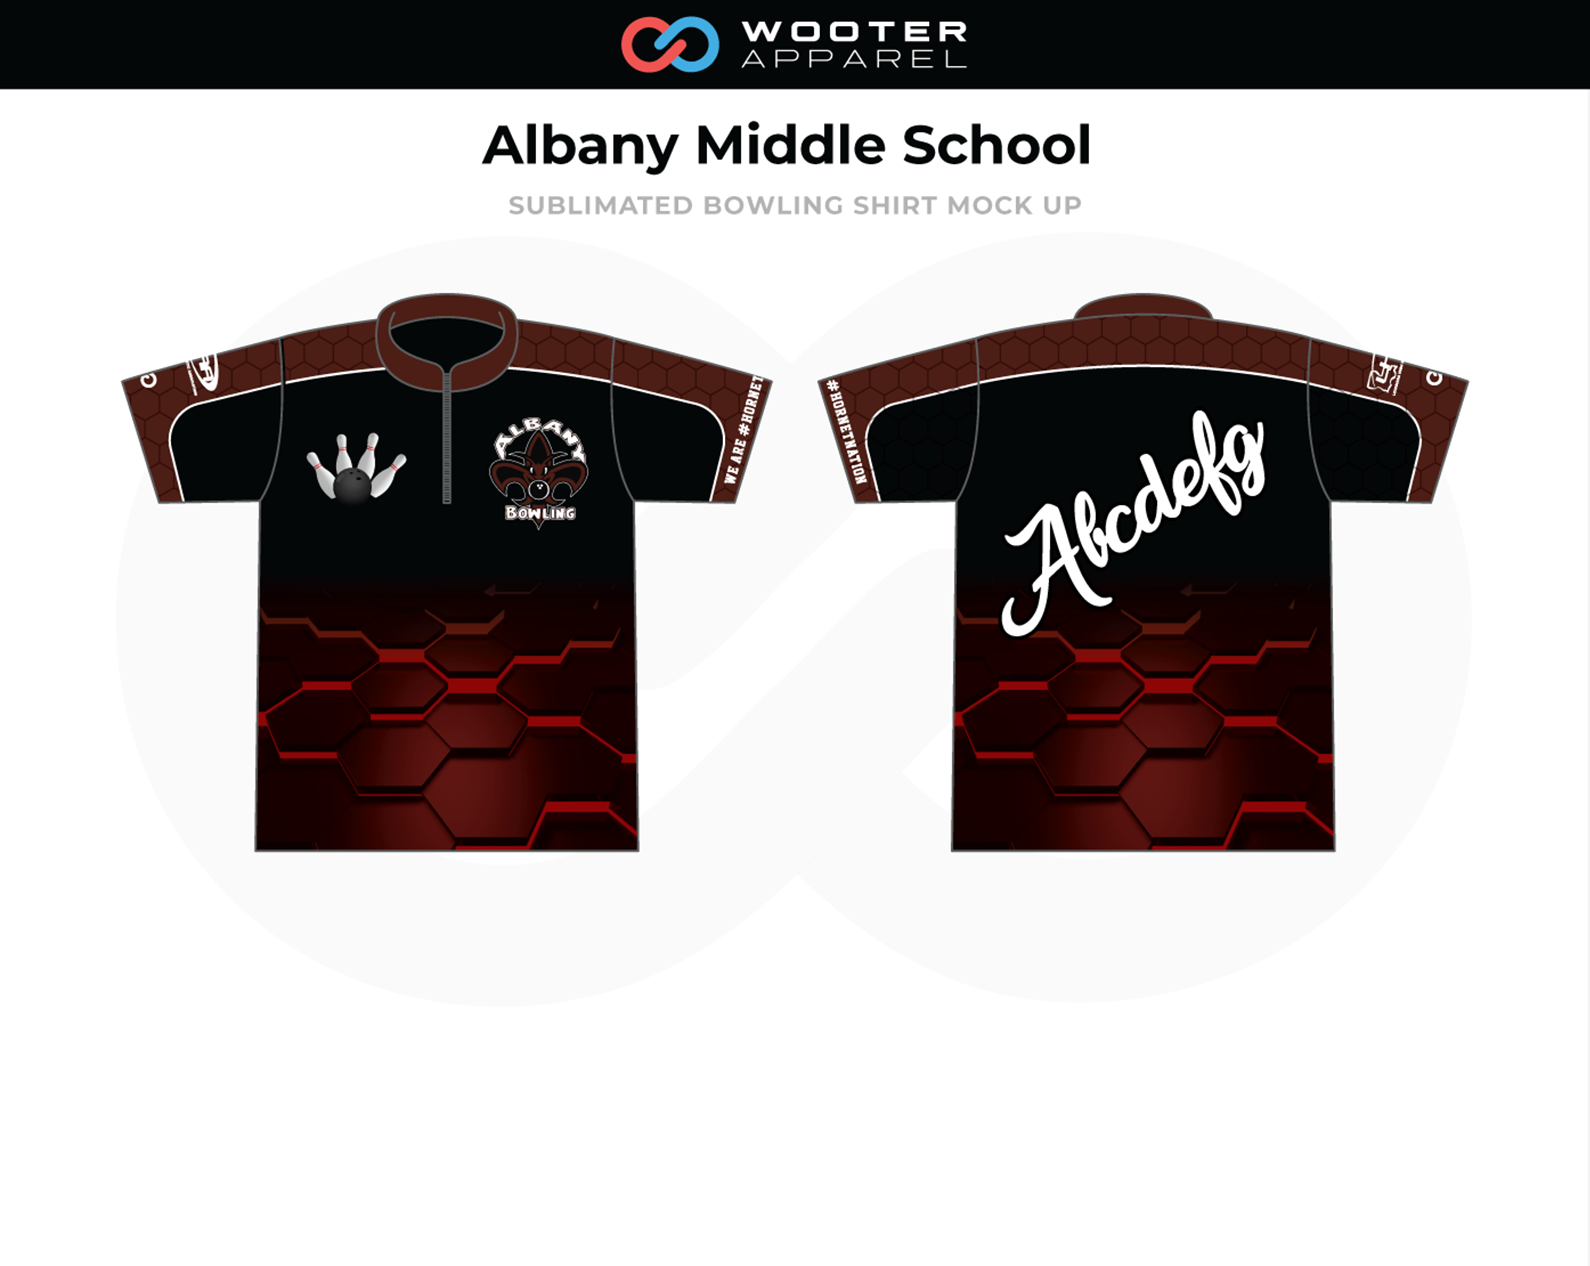 yours Brave Artificial Custom Bowling Shirts & Custom Bowling League Shirtts | Wooter Apparel